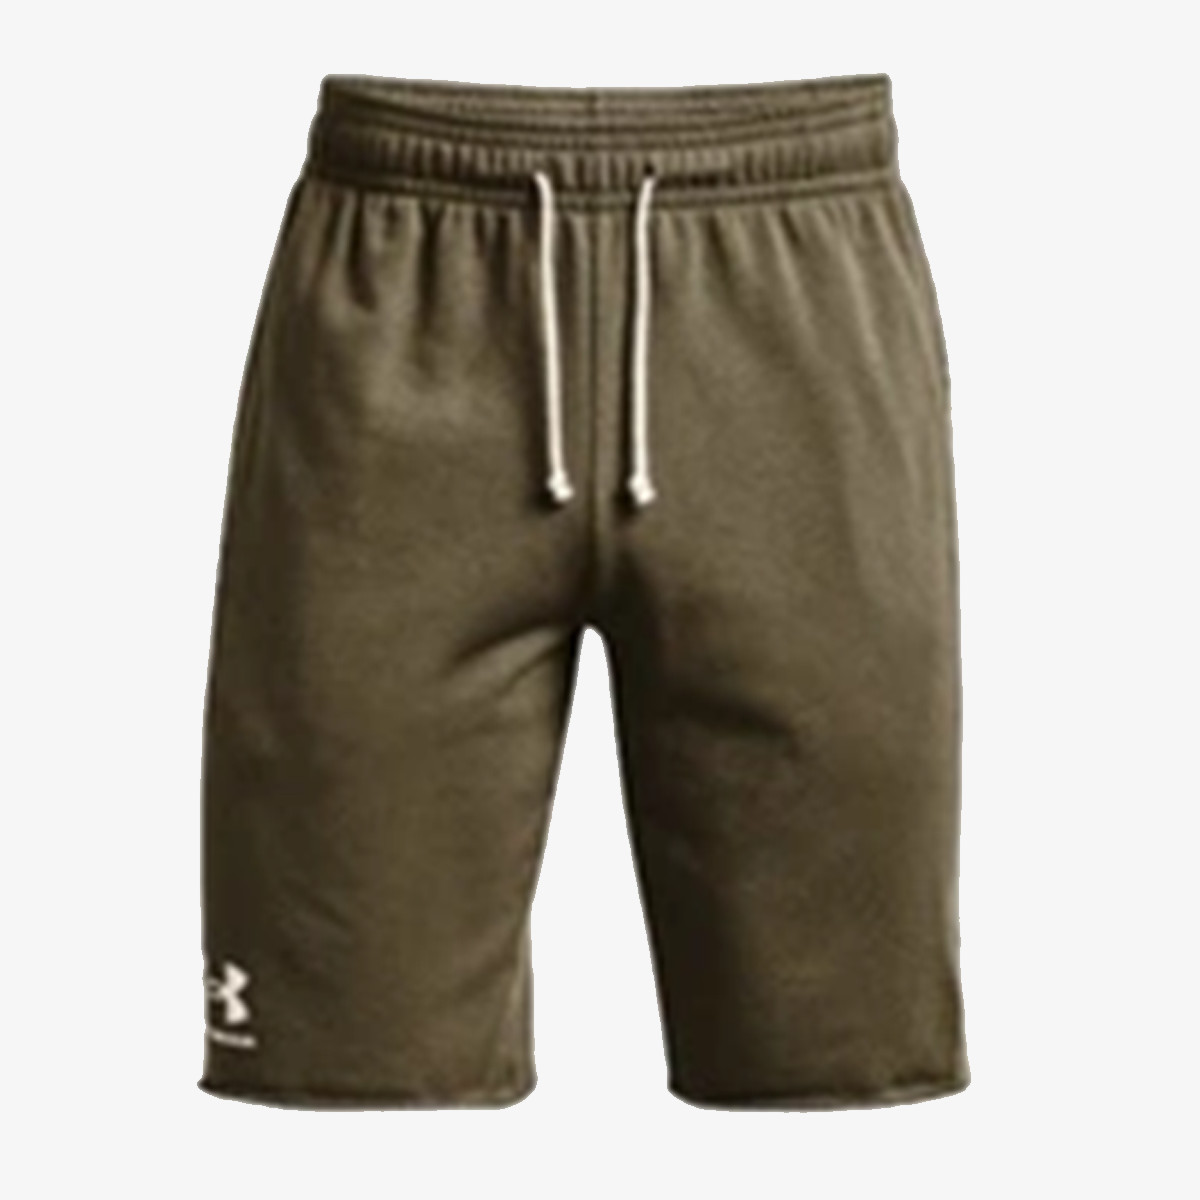 Rival Terry Short 